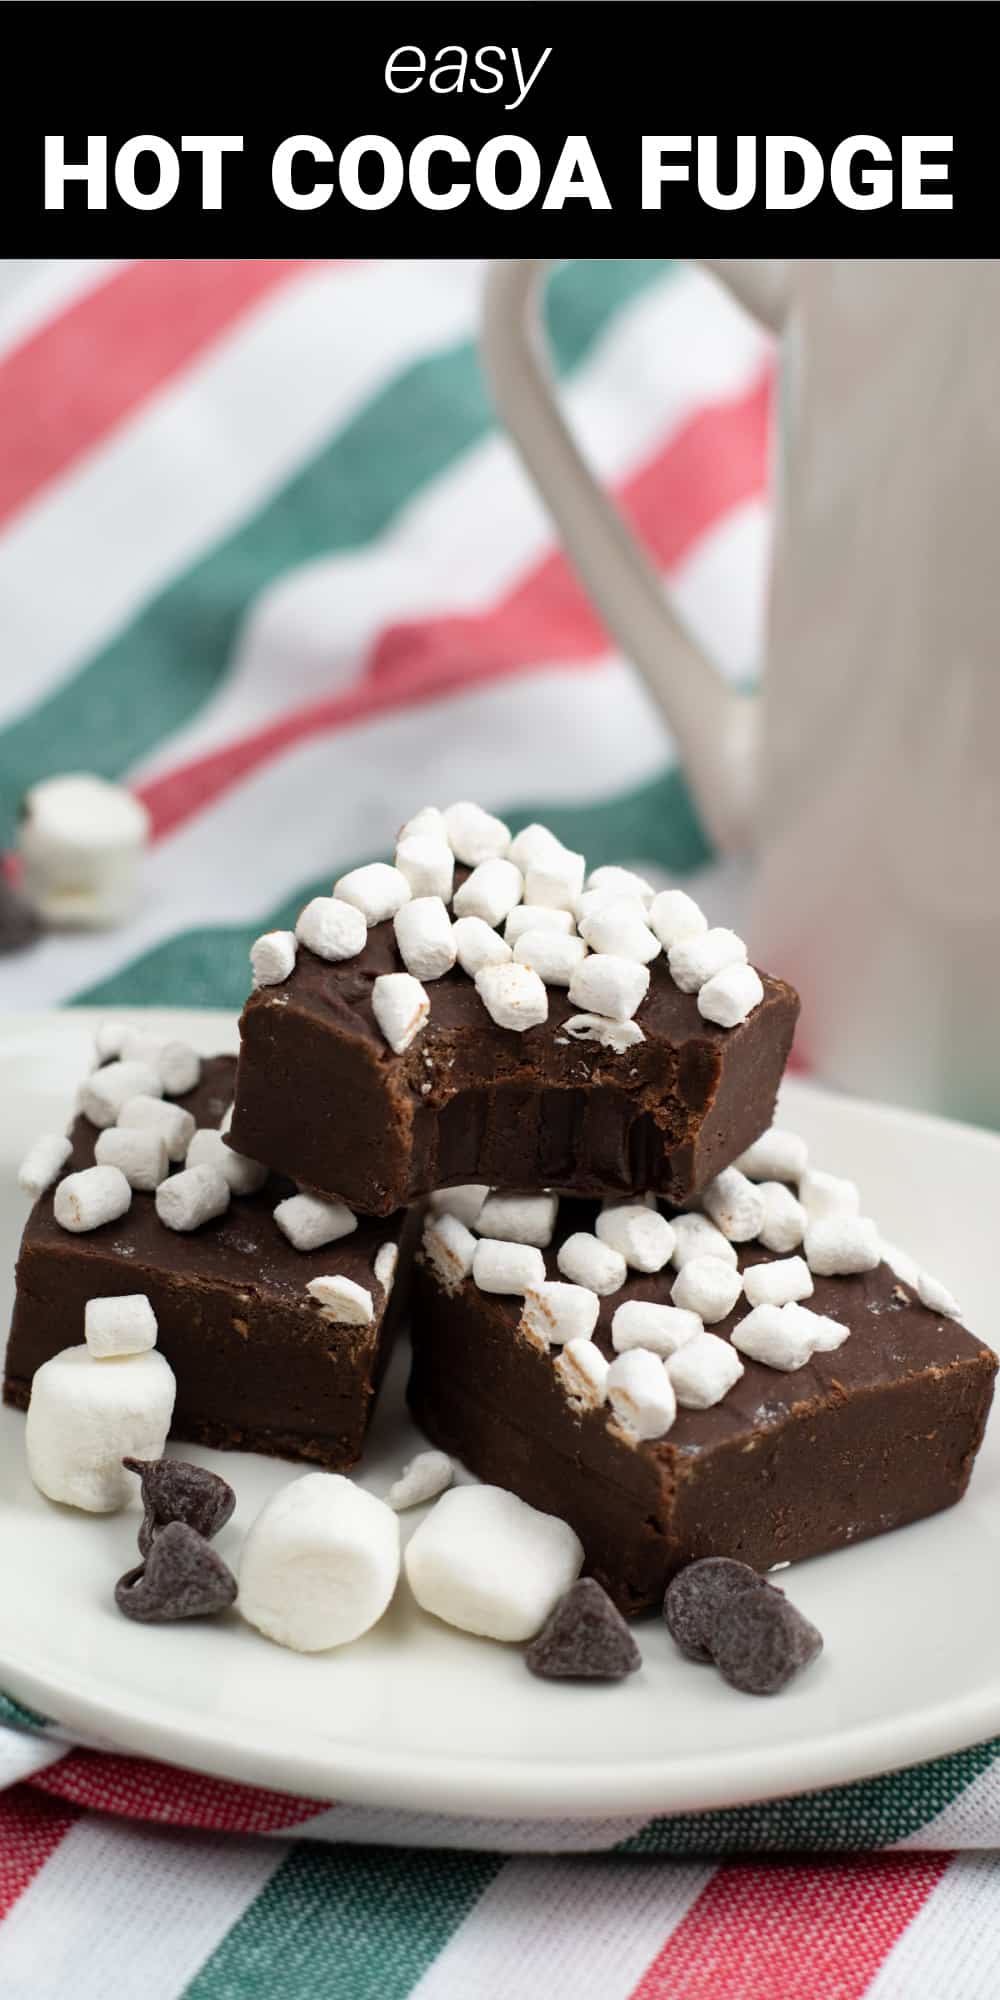 This Hot Cocoa Fudge is sweet, chocolatey and so absolutely irresistible, it’s impossible to eat just one piece. Complete with tiny marshmallows, this fudge has the same delicious flavor of everyone’s favorite winter beverage, hot cocoa!